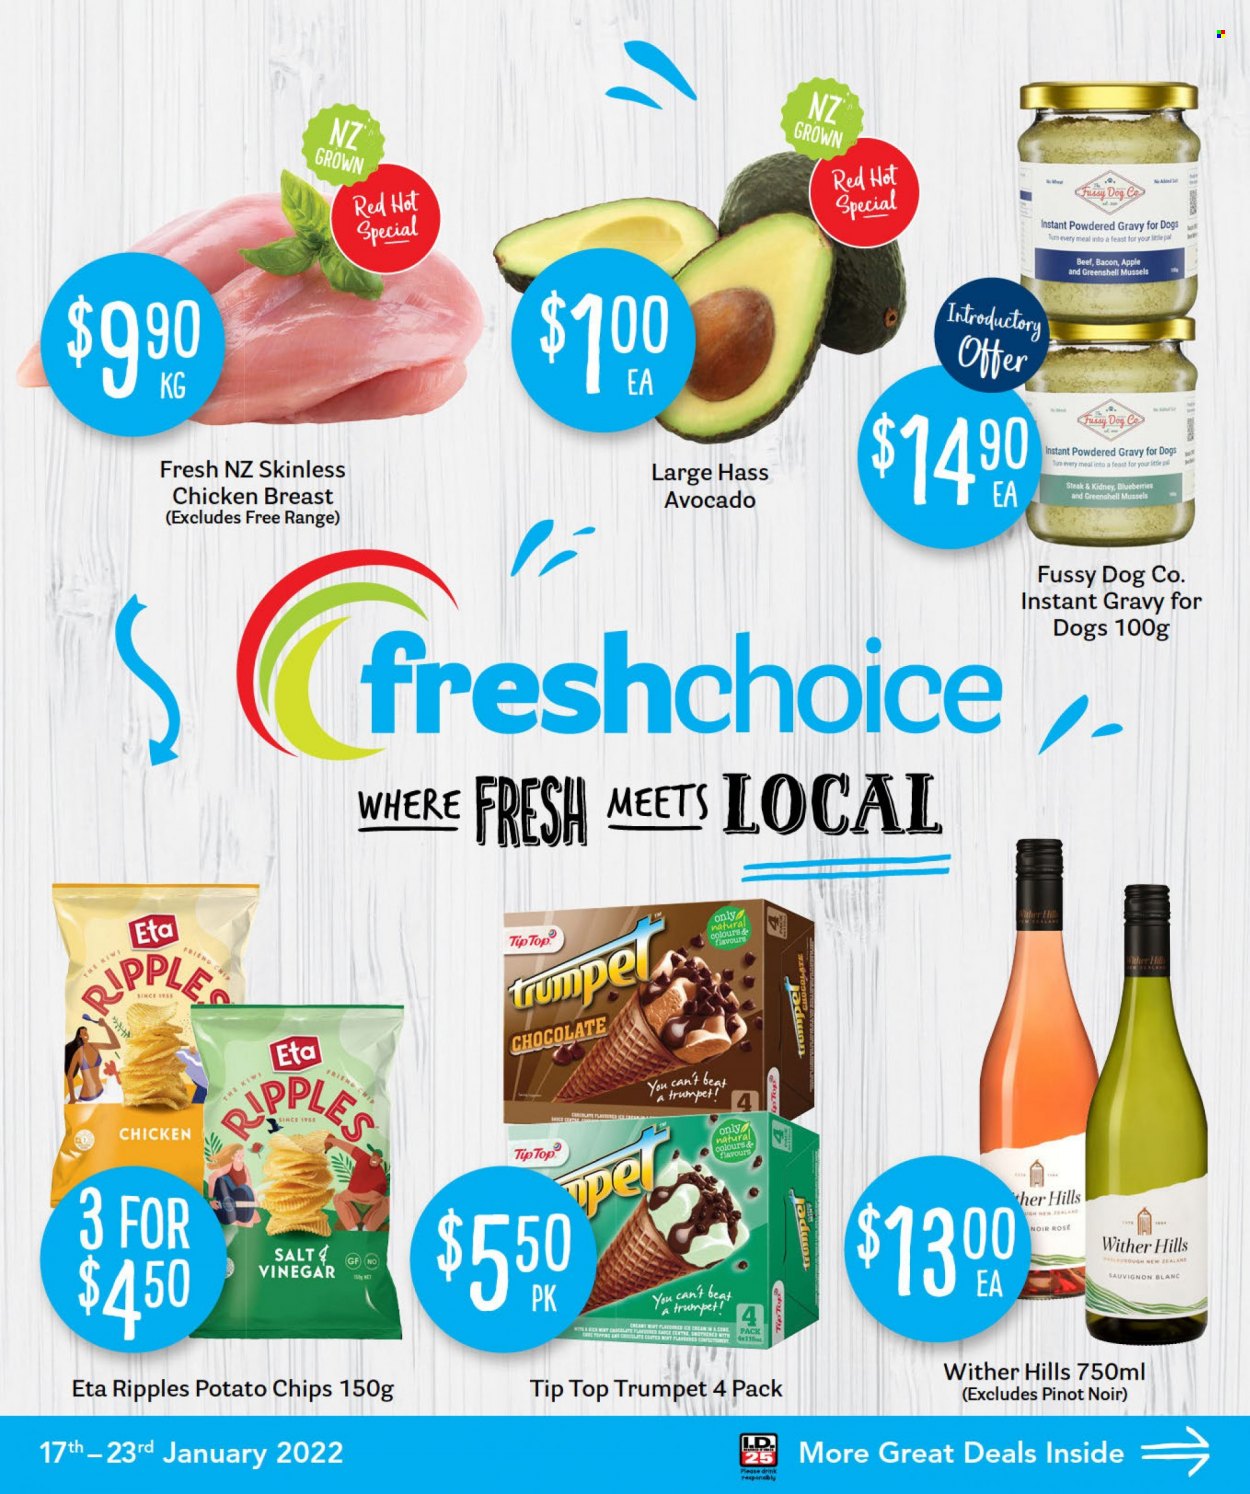 thumbnail - Fresh Choice mailer - 17.01.2022 - 23.01.2022 - Sales products - Tip Top, avocado, kiwi, mussels, bacon, chocolate, potato chips, chips, salt, red wine, white wine, wine, Pinot Noir, Wither Hills, Sauvignon Blanc, rosé wine, chicken breasts, steak, Hill's, rose. Page 1.